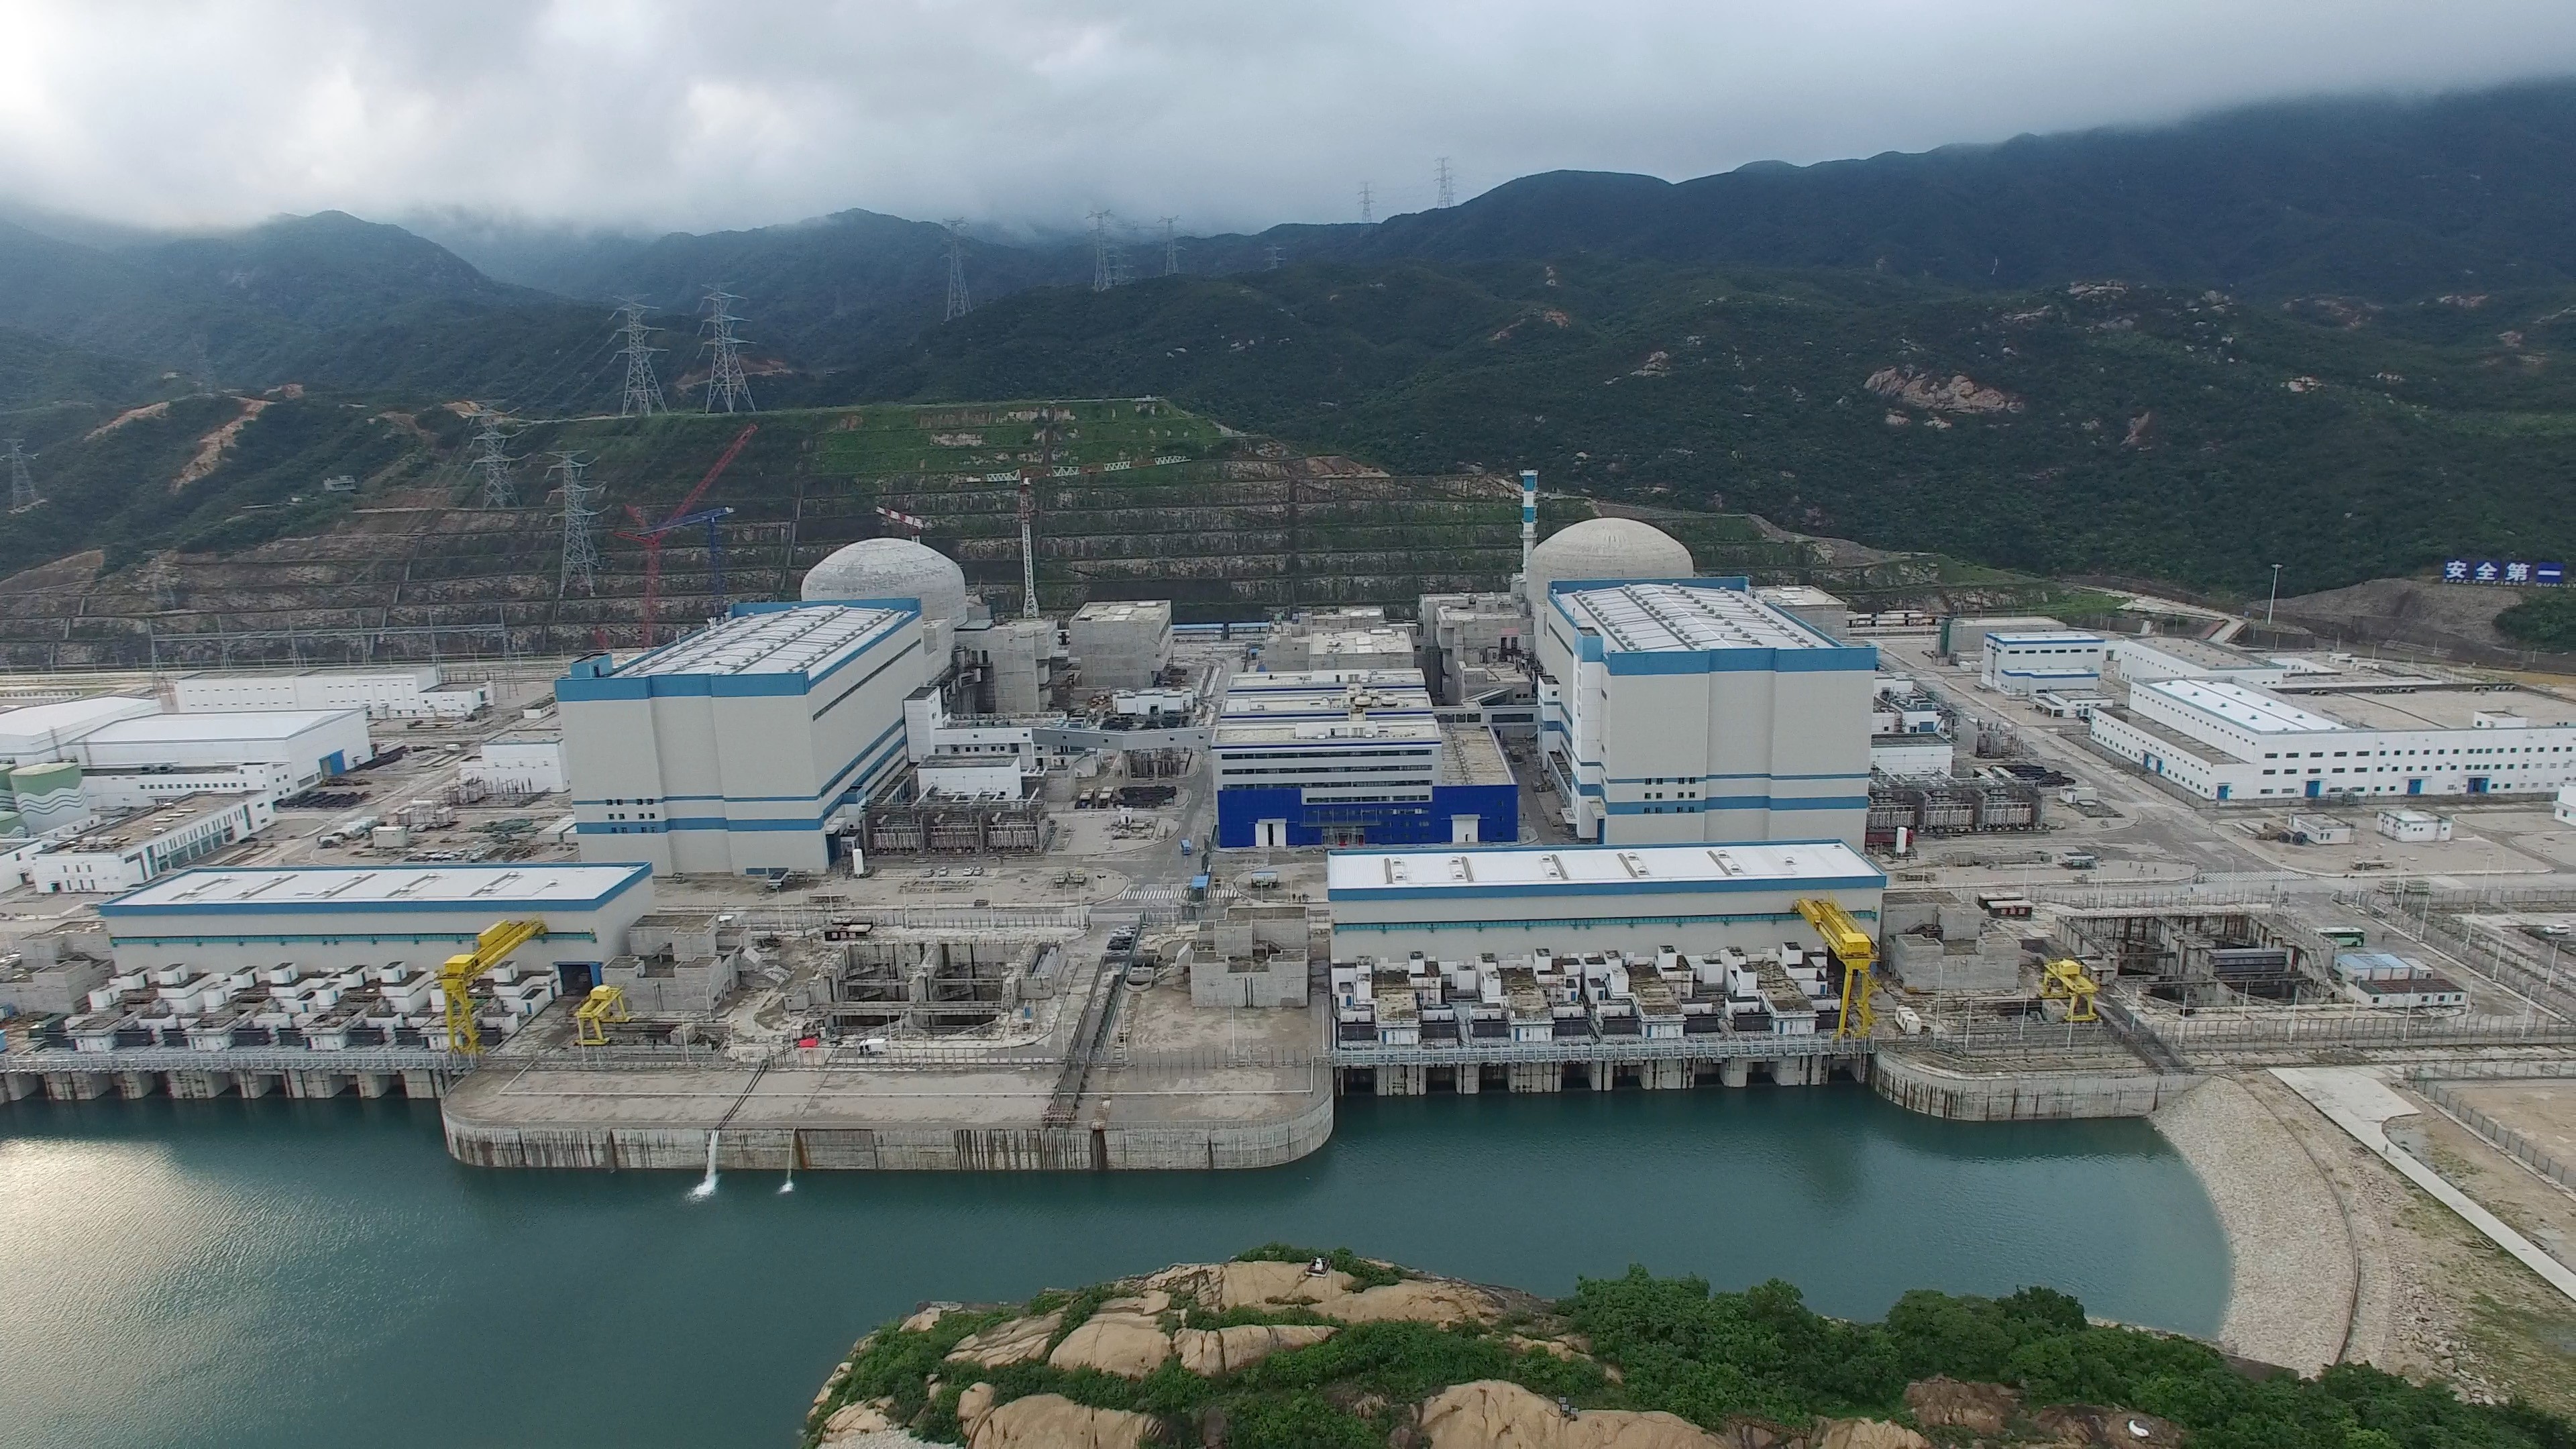 The Taishan Nuclear Power Plant has come online more than a decade after the project was launched. Photo: FactWire